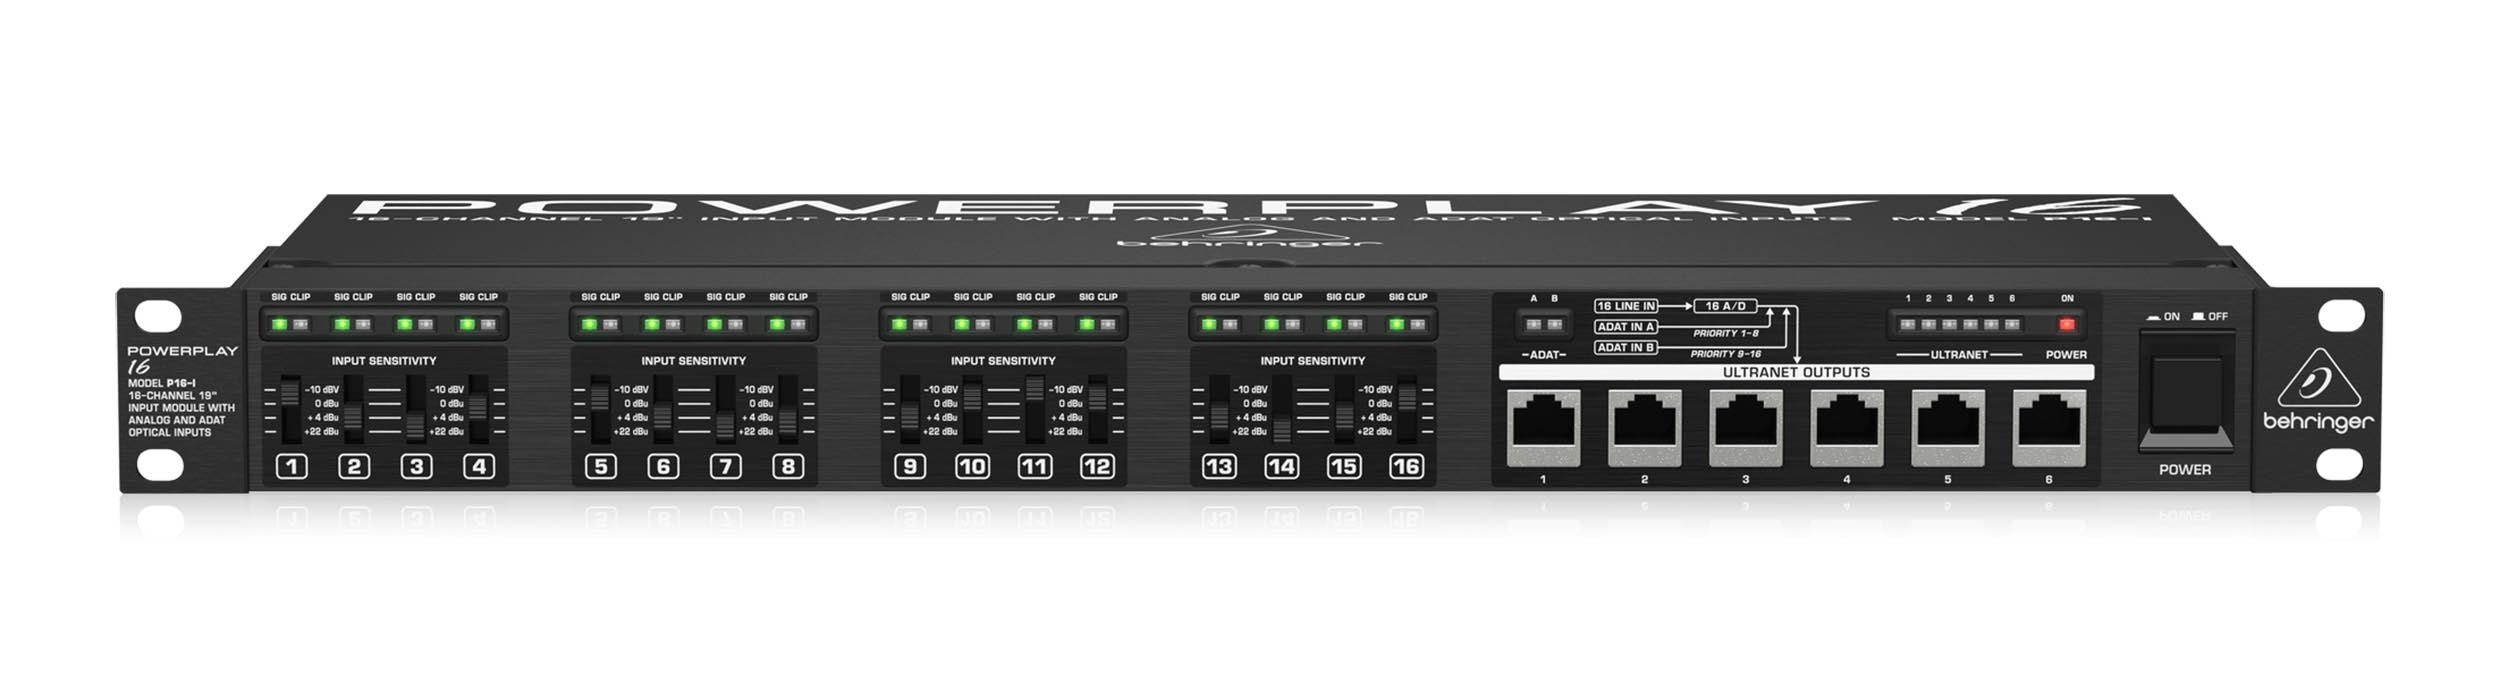 Behringer Powerplay P16-I, 16-Channel Input Module by Behringer